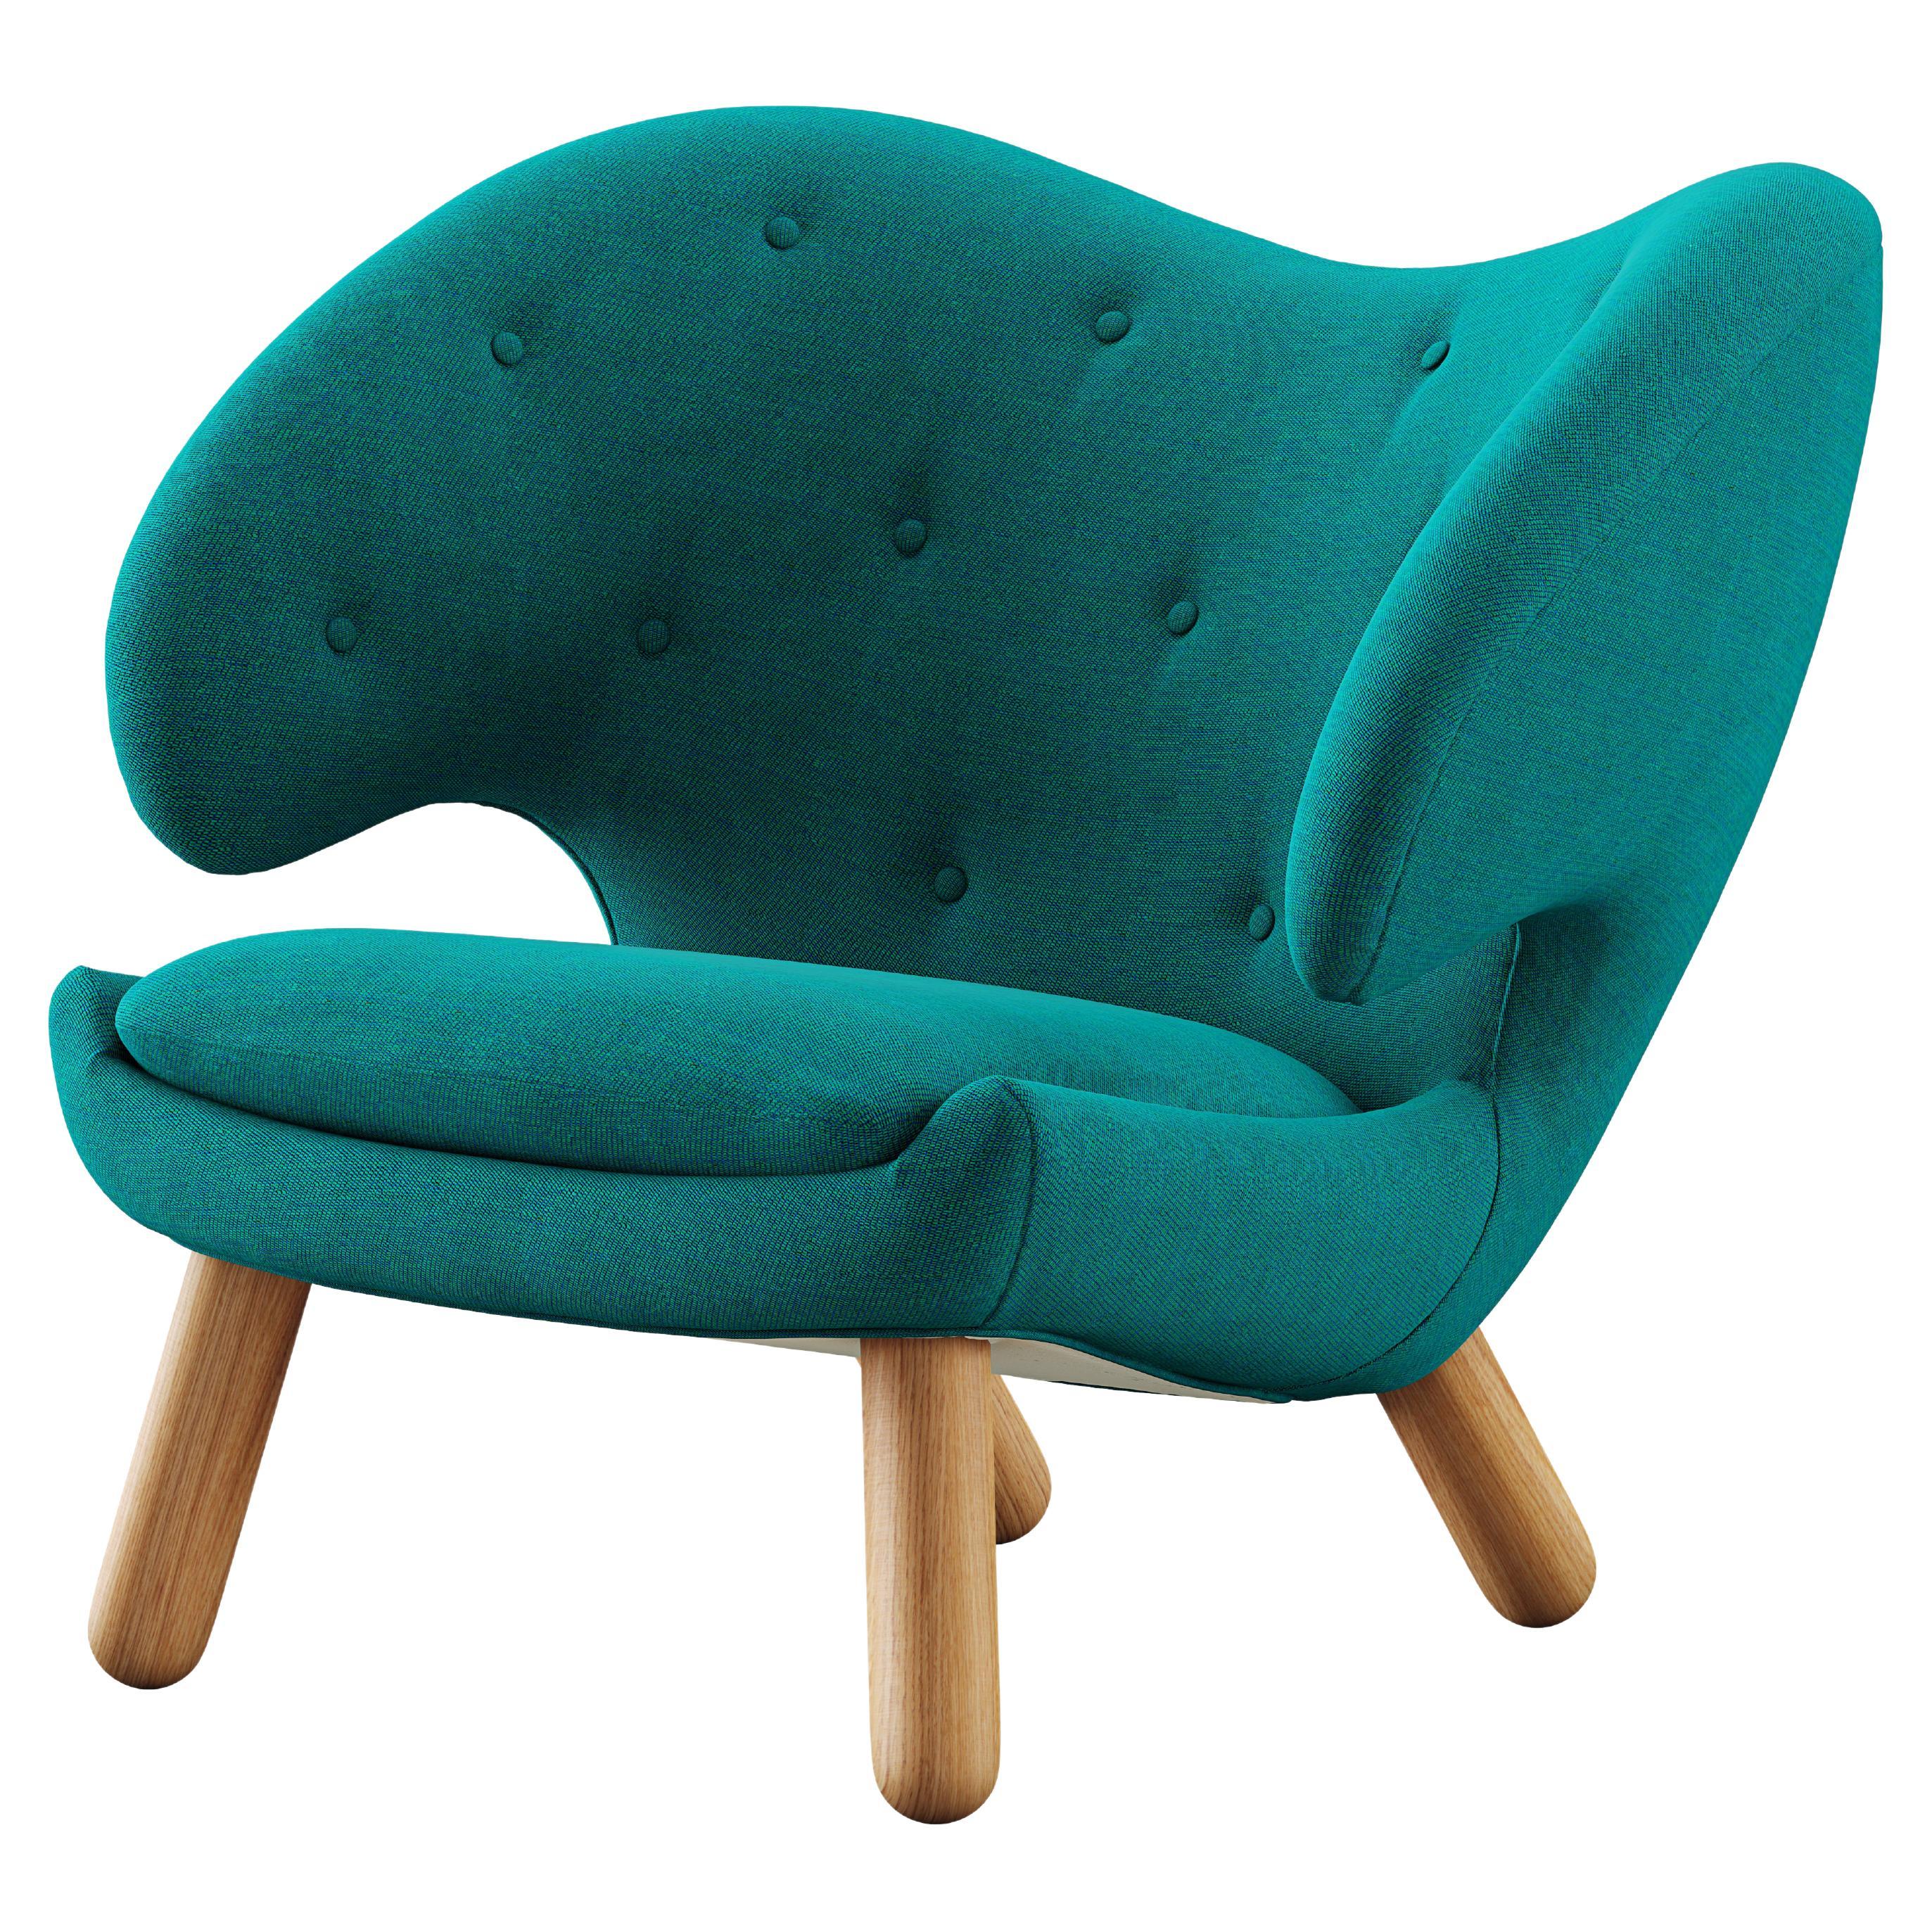 Finn Juhl Pelican Chair Upholstered in Wood and Fabric For Sale at 1stDibs